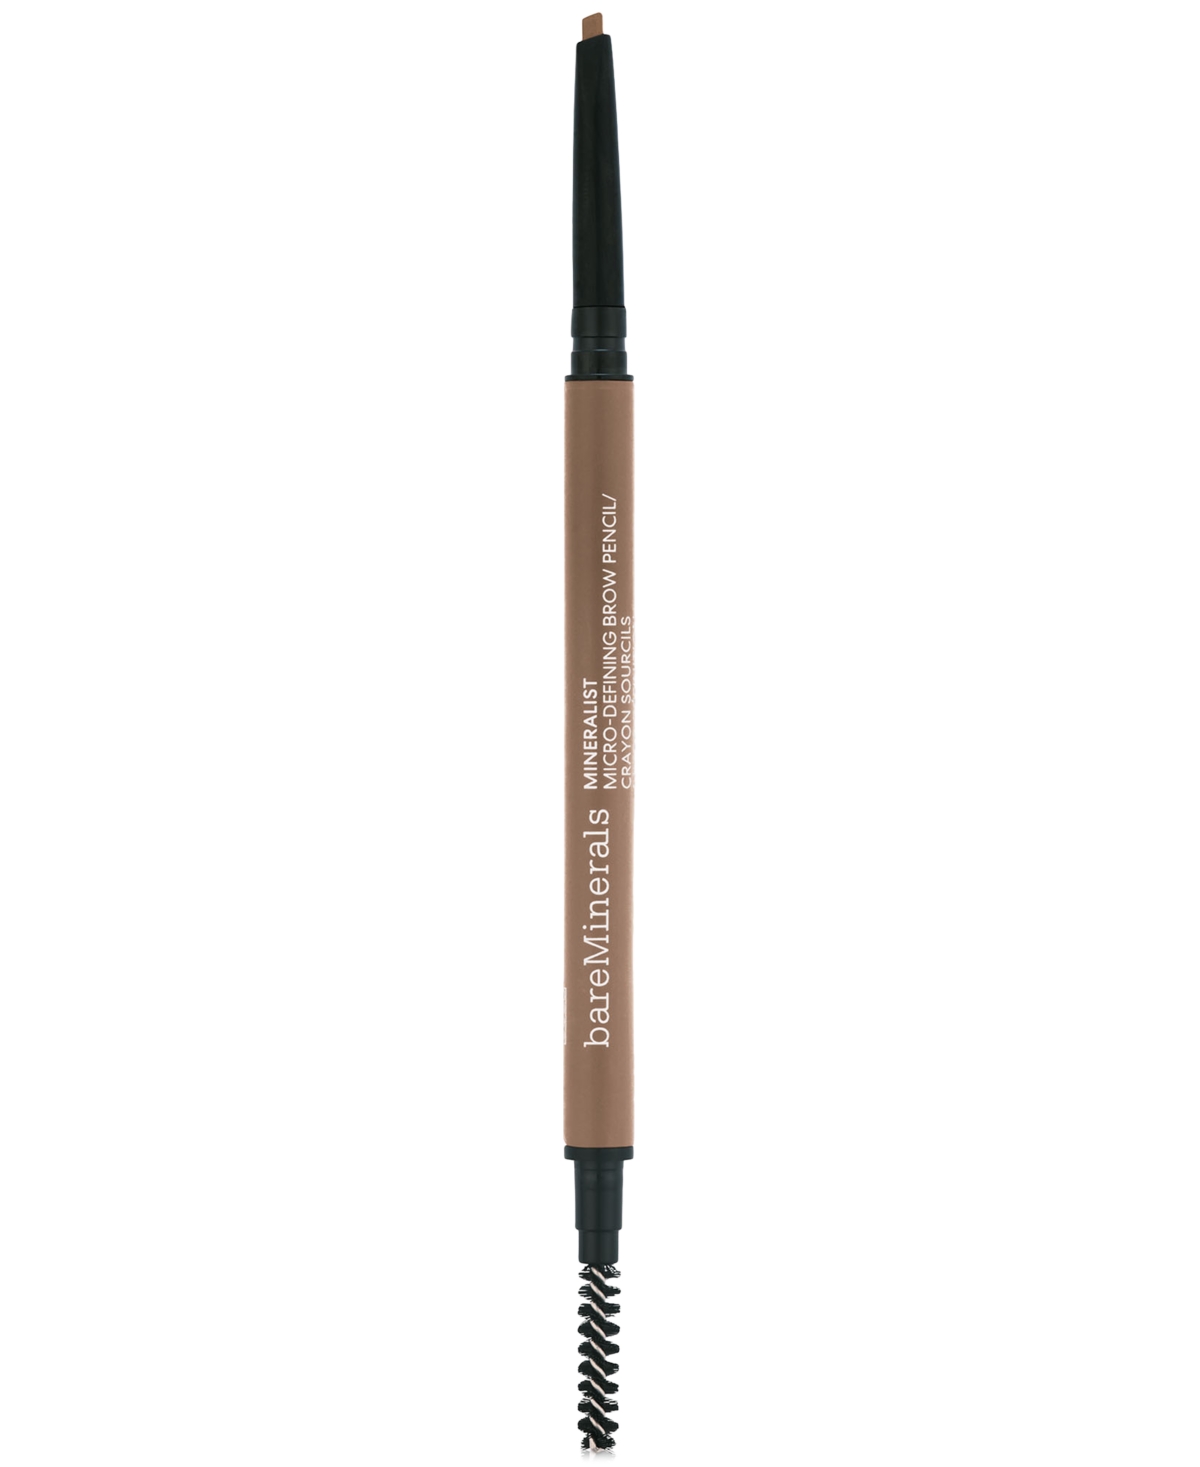 Bareminerals Mineralist Micro-defining Brow Pencil In Taupe